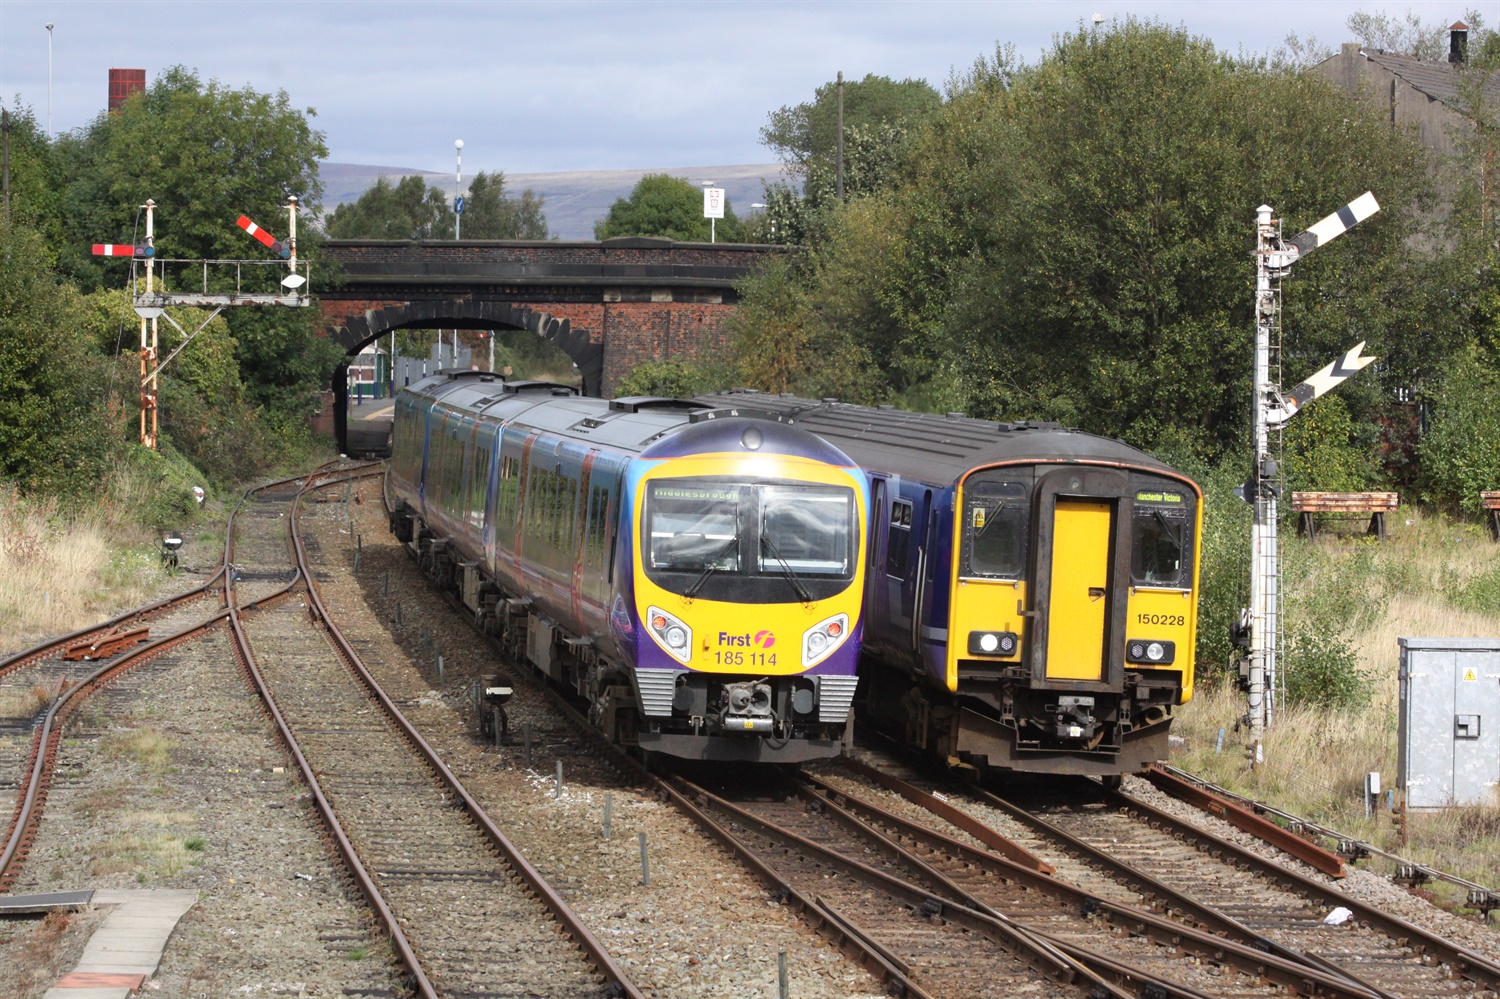 WYCA presses for quick ECML upgrades to create HS2 and NPR capacity